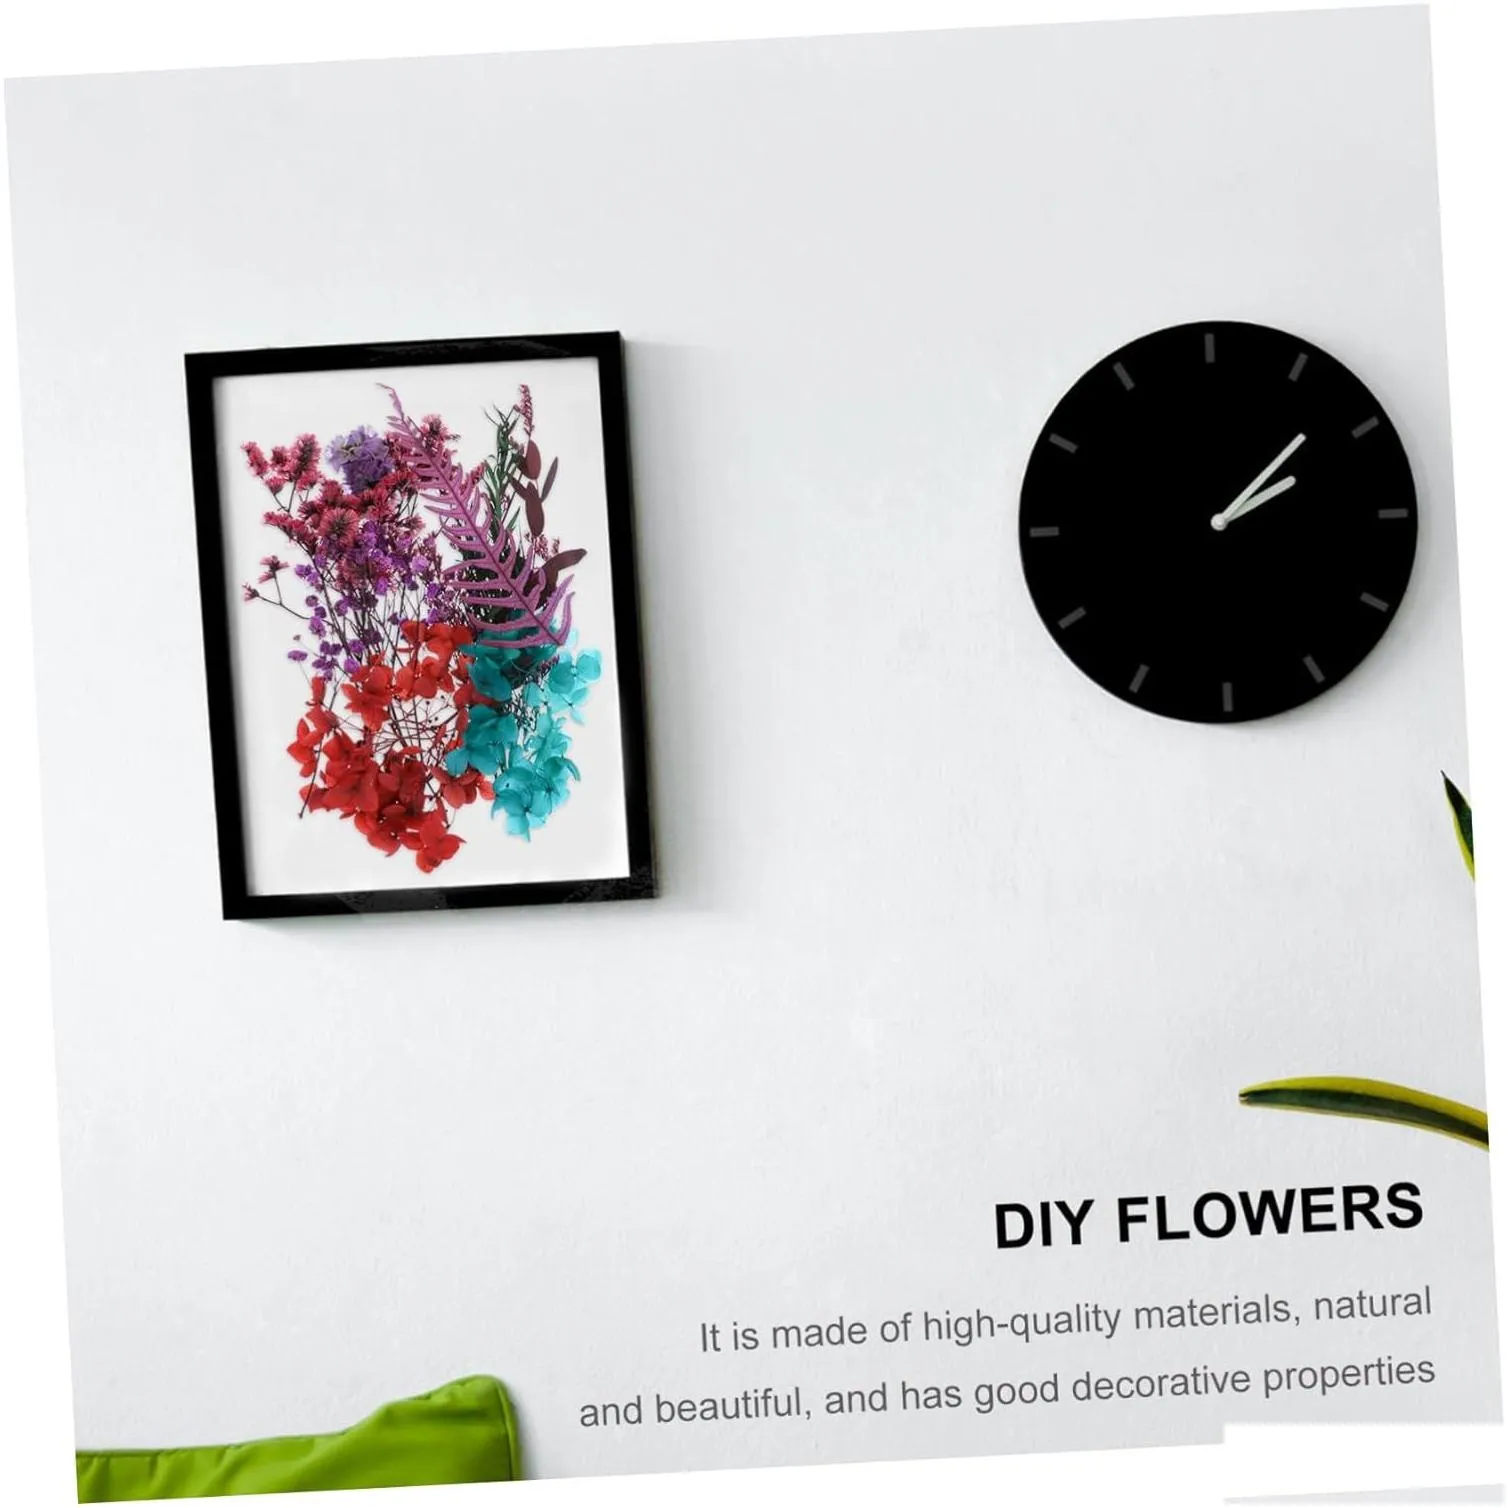 Dried Flowers 1 Box Po Frame Candle Manual Flower Daisy Gift Handmade Diy Pressed Herbarium Drop Delivery Home Garden Decor Fragrances Otsy9